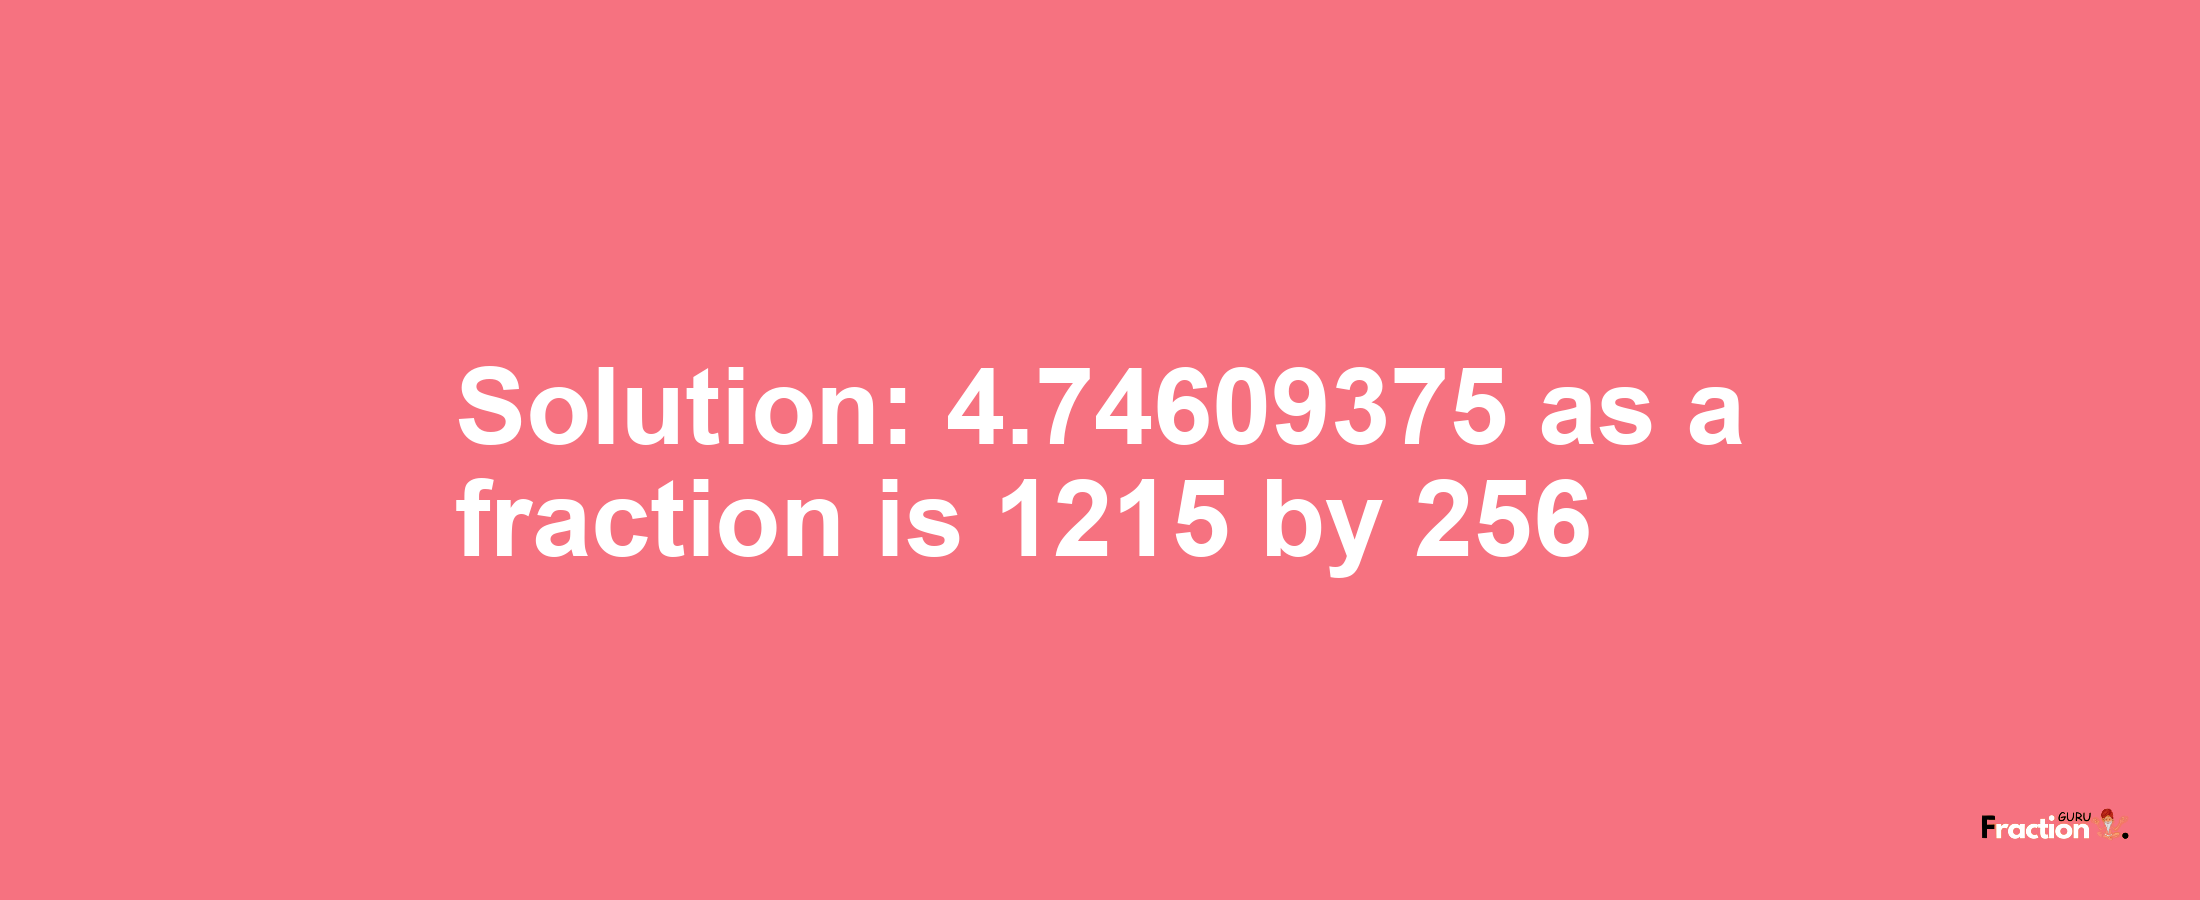 Solution:4.74609375 as a fraction is 1215/256